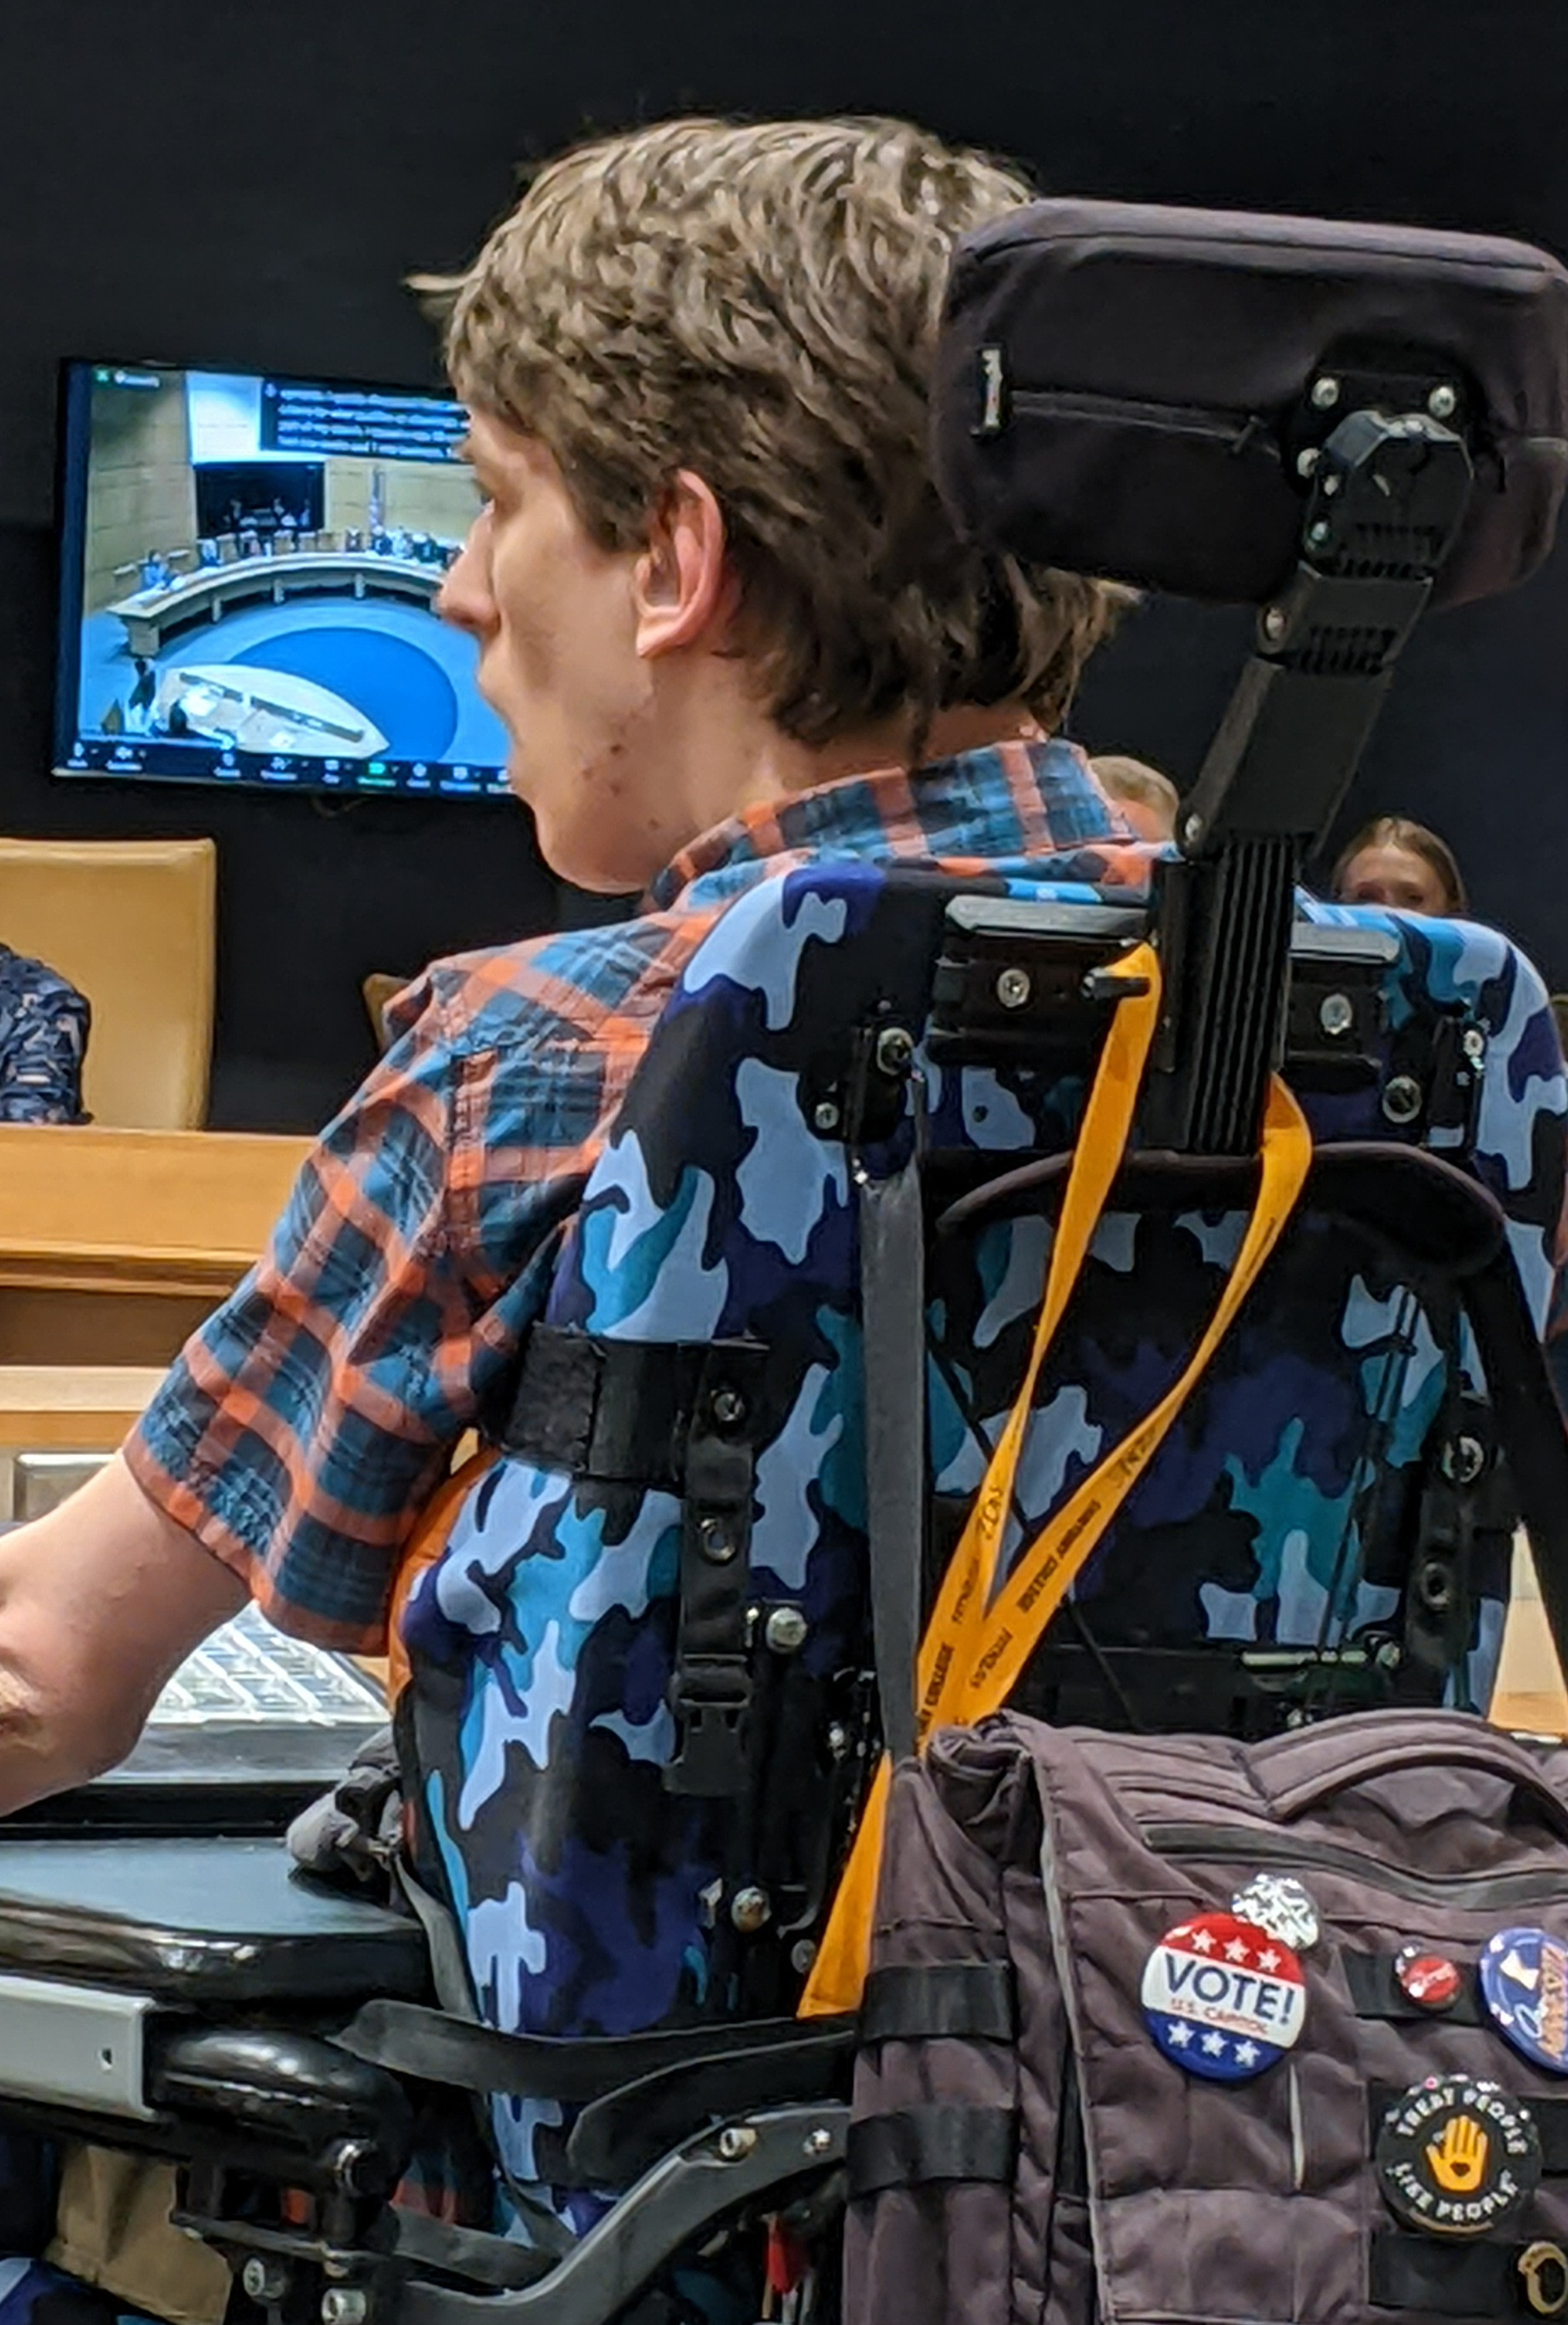 Back of Justin seated in his wheelchair, buttons on the back of his chair say Vote and Treat People Like People, monitor shows senate committee room